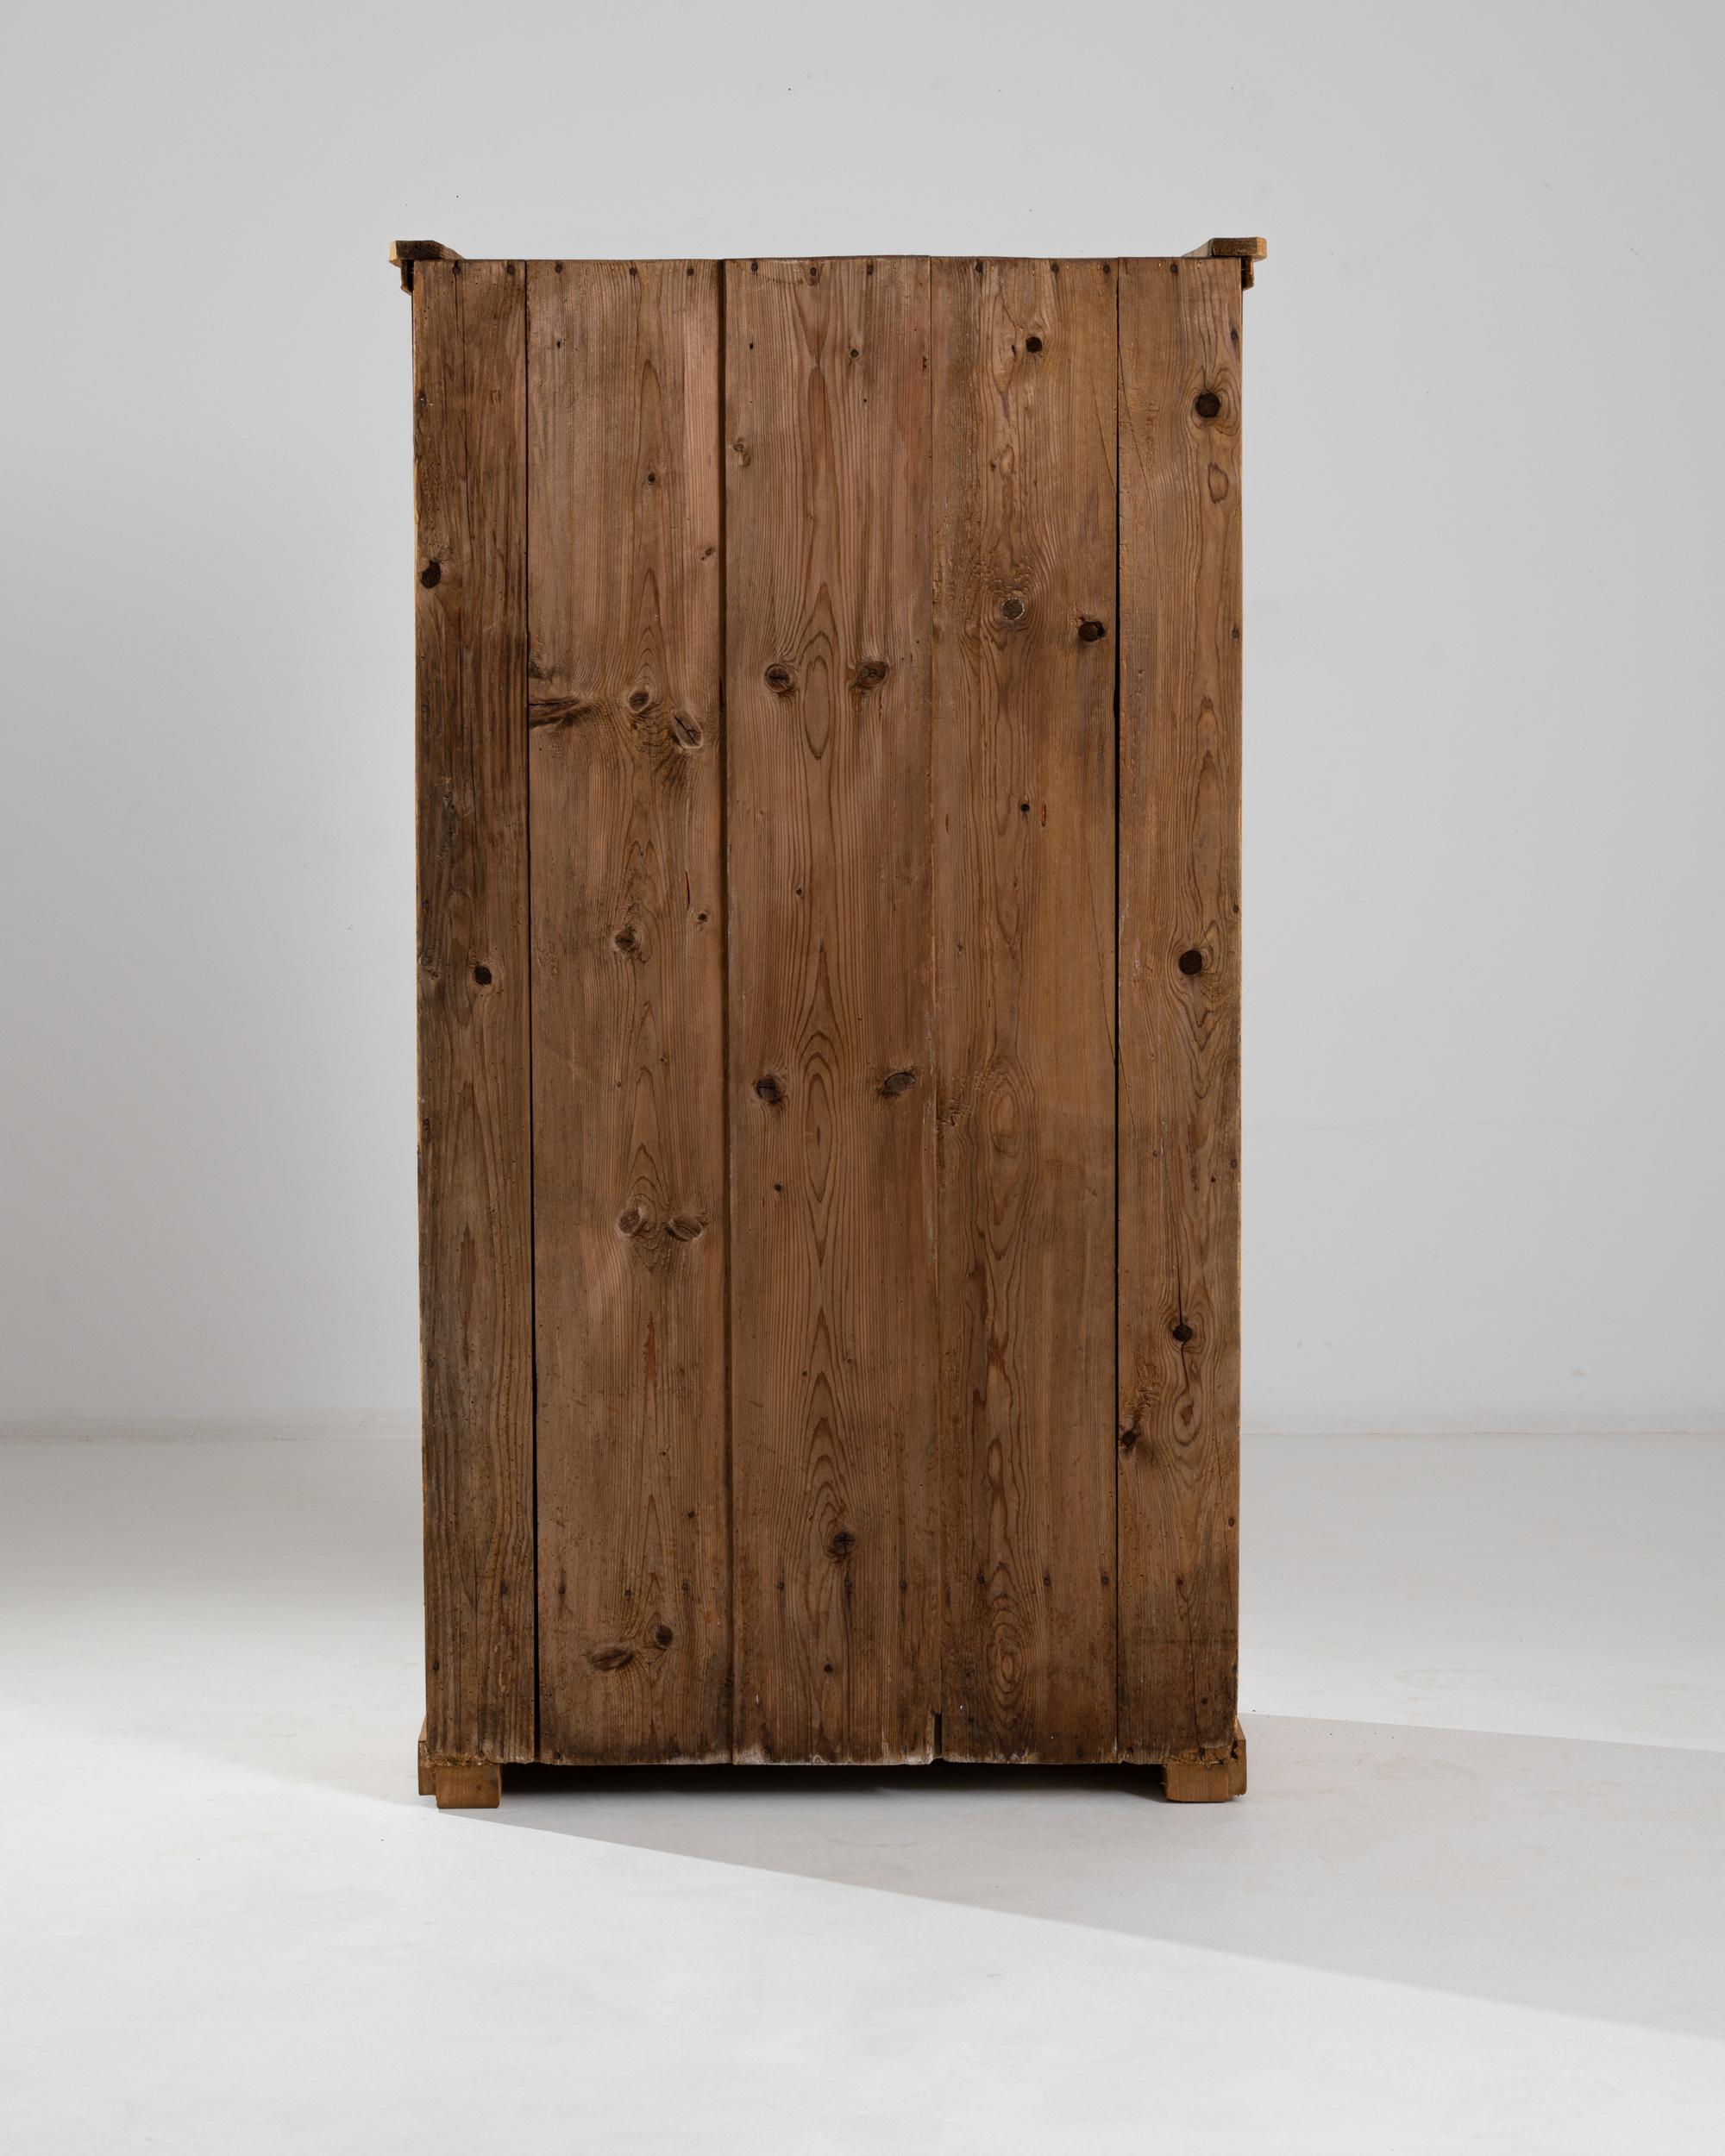 Experience the timeless elegance of this 19th-century Central European wooden cabinet, showcasing a natural wood finish that exudes warmth and authenticity. A single door, beautifully crafted and adorned, opens to unveil a spacious interior with two